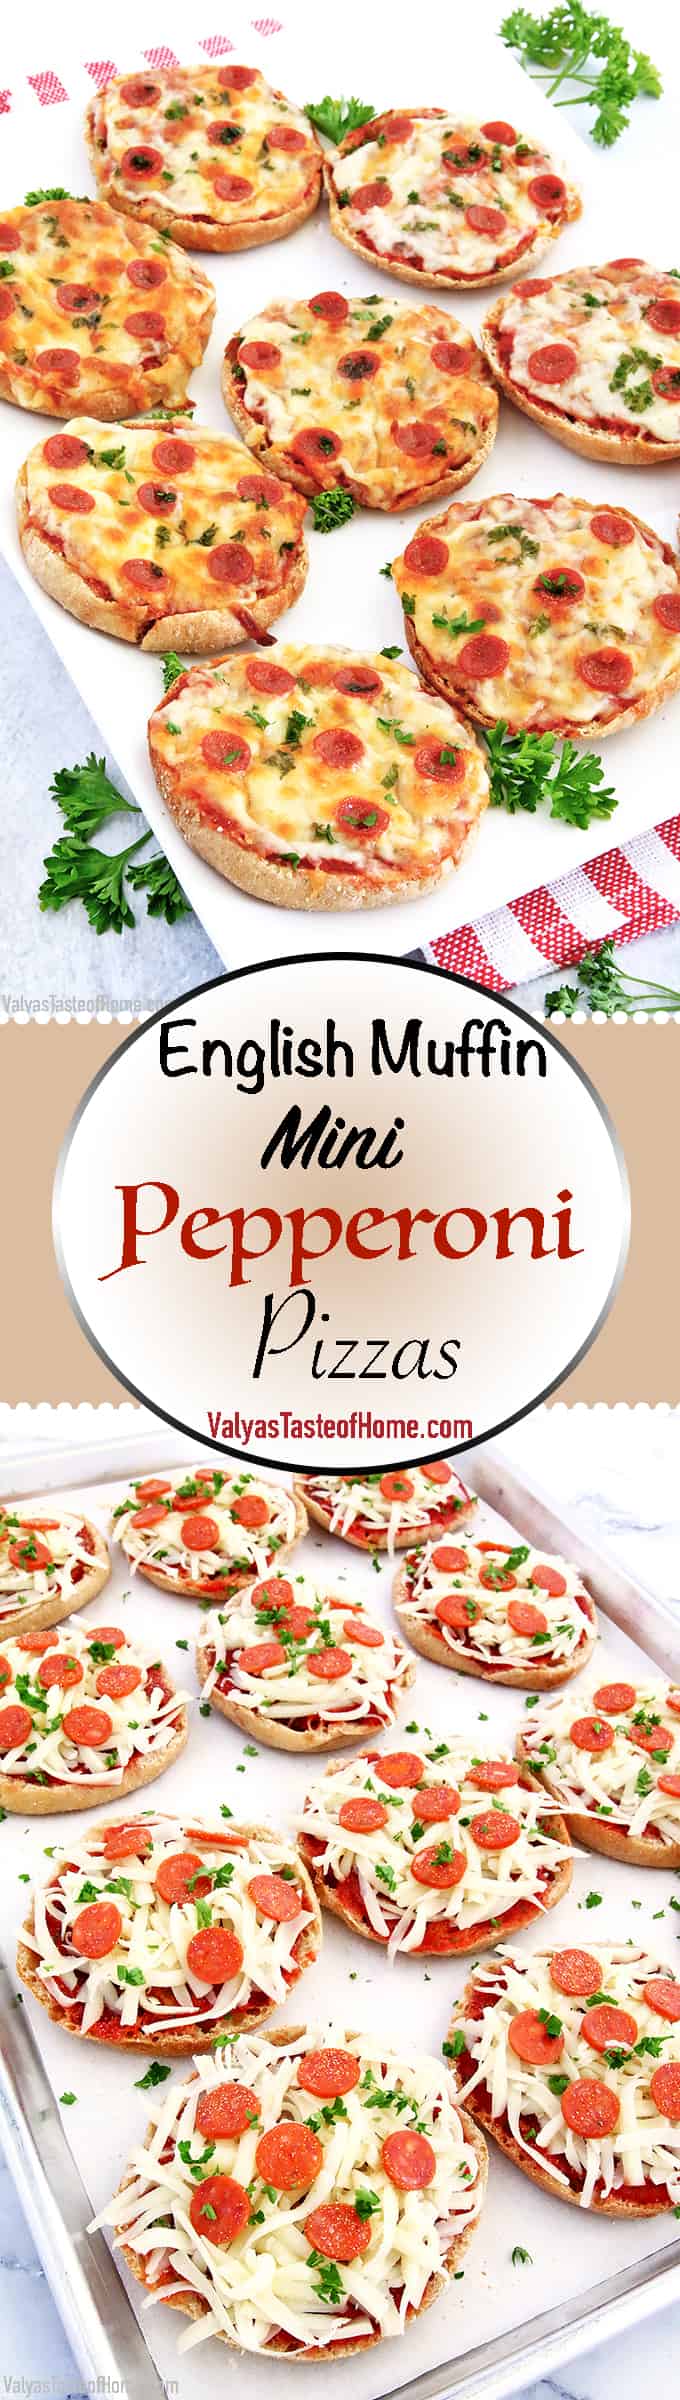 These English Muffin Mini Pepperoni Pizzas is a great project for the kiddos. It takes just a few basic ingredients, but the little ones love making them. They feel like they cooked their own pizza!